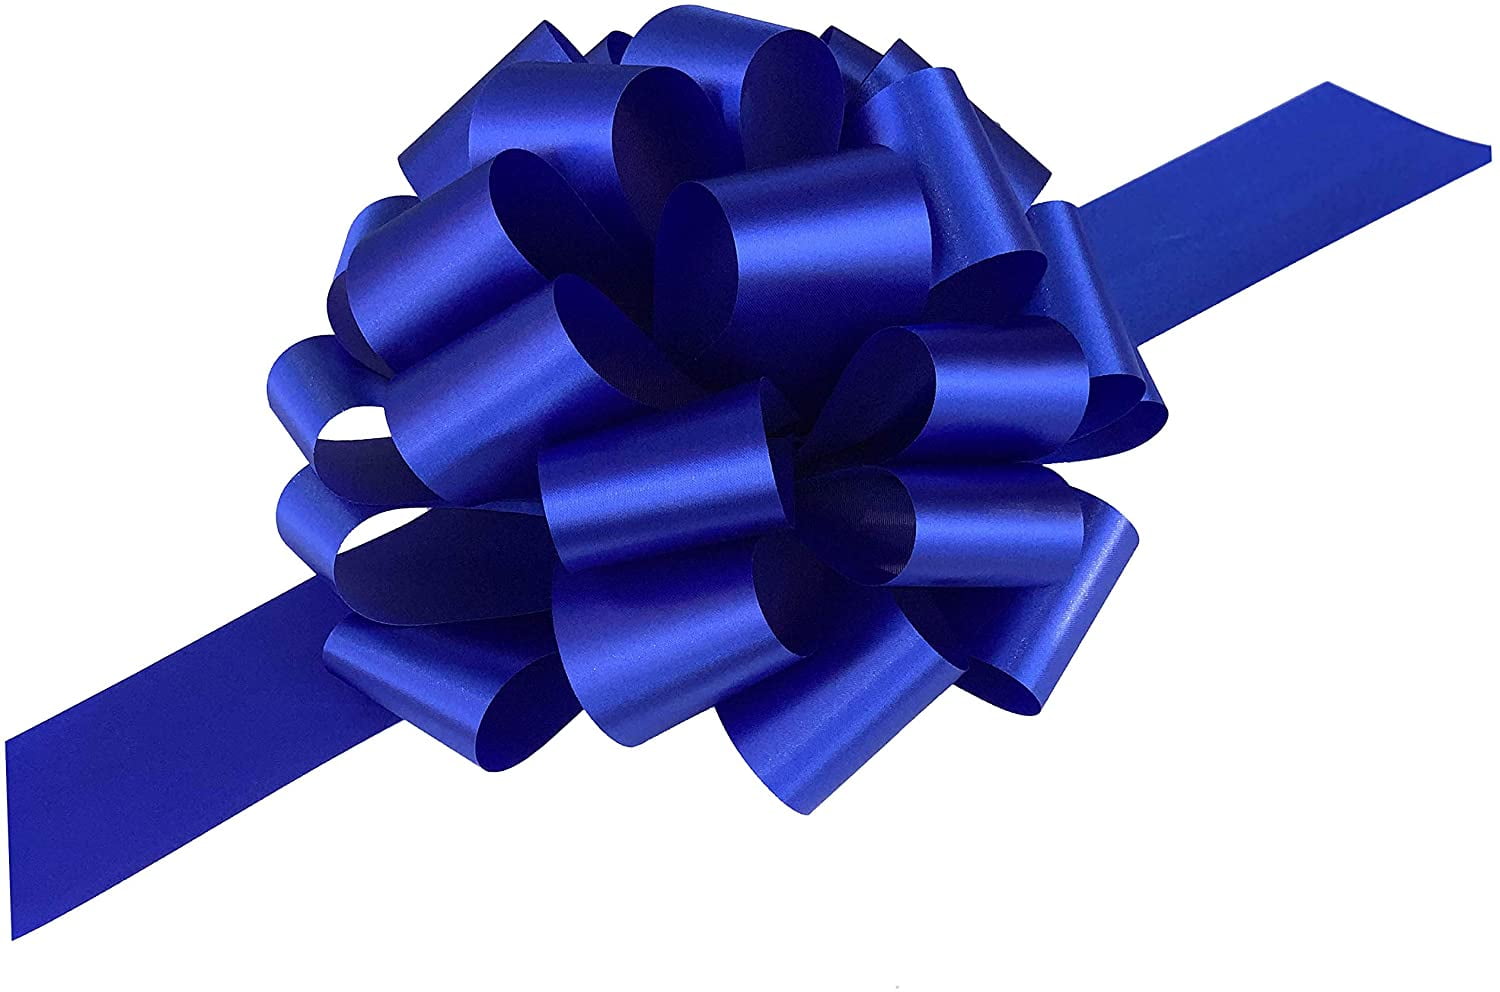 Large Royal Blue Ribbon Pull Bows - 9 Wide, Set of 6, Christmas, Veteran's  Day, Police Support, 4th of July, Graduation, Memorial Day 